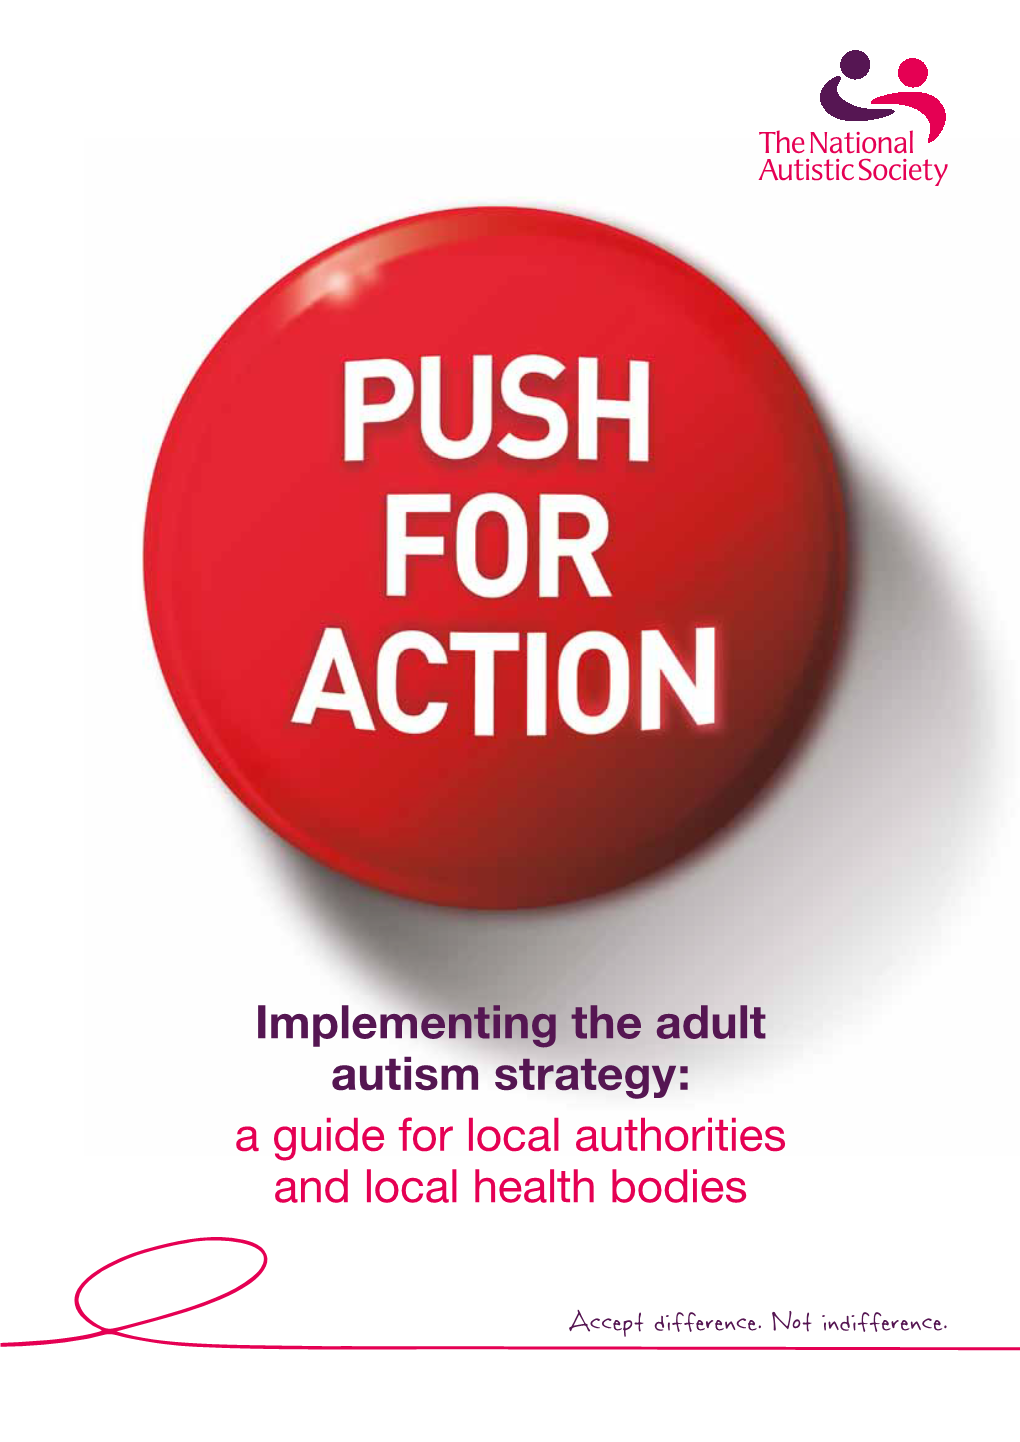 Implementing the Adult Autism Strategy: a Guide for Local Authorities and Local Health Bodies the Autism Act 2009 Was a Landmark Piece of Legislation